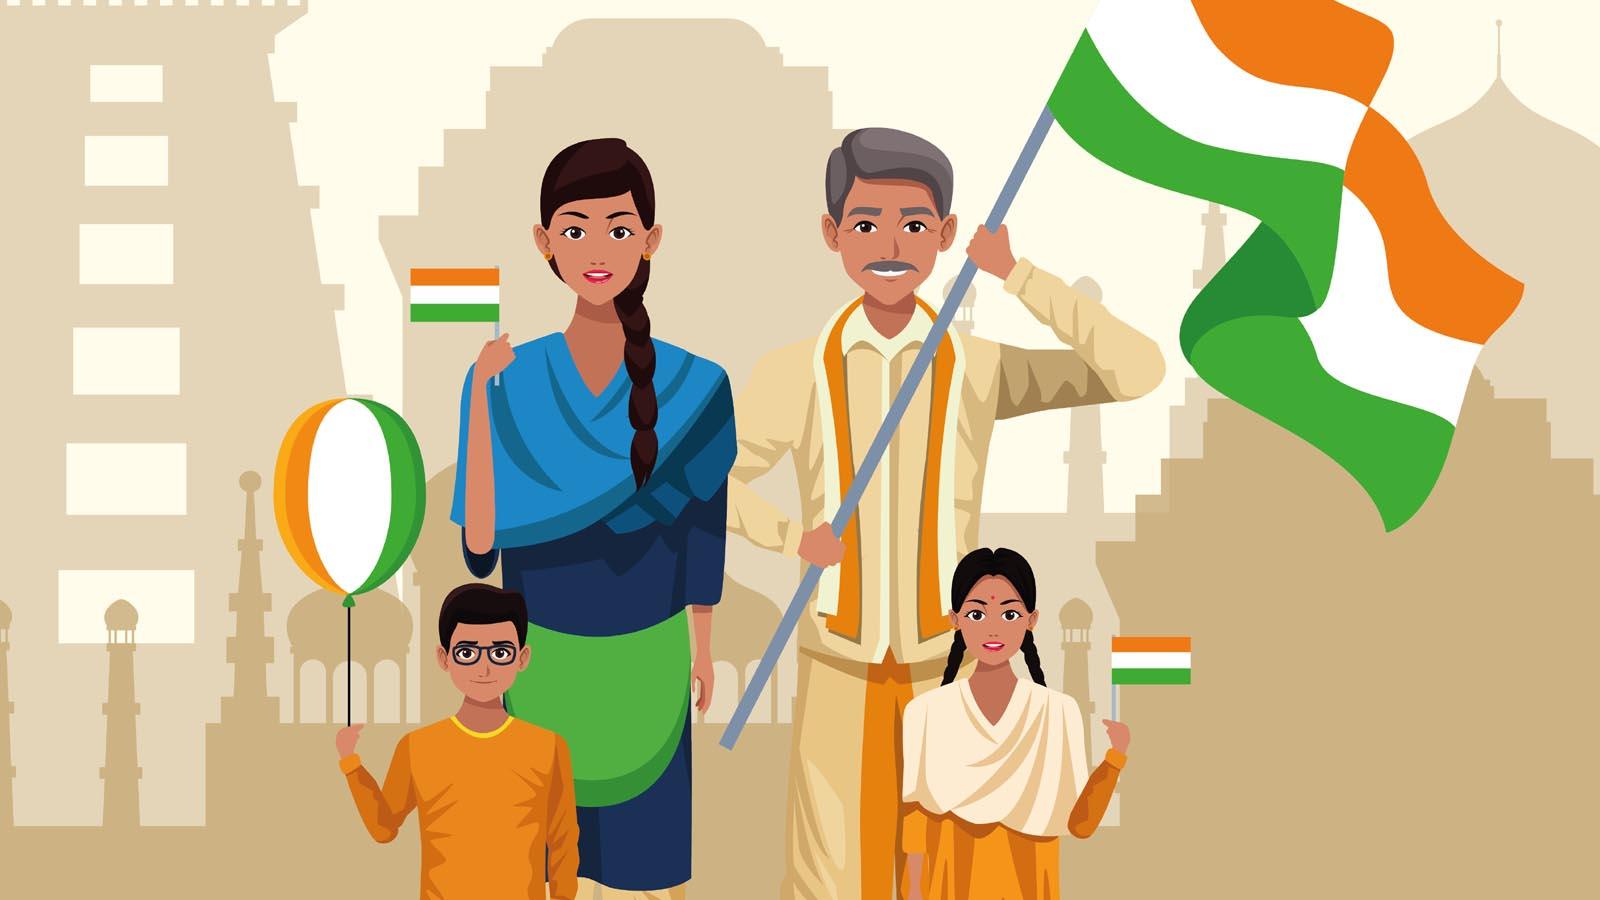 Happy Republic Day Wishes for Parents Patriotic Messages images